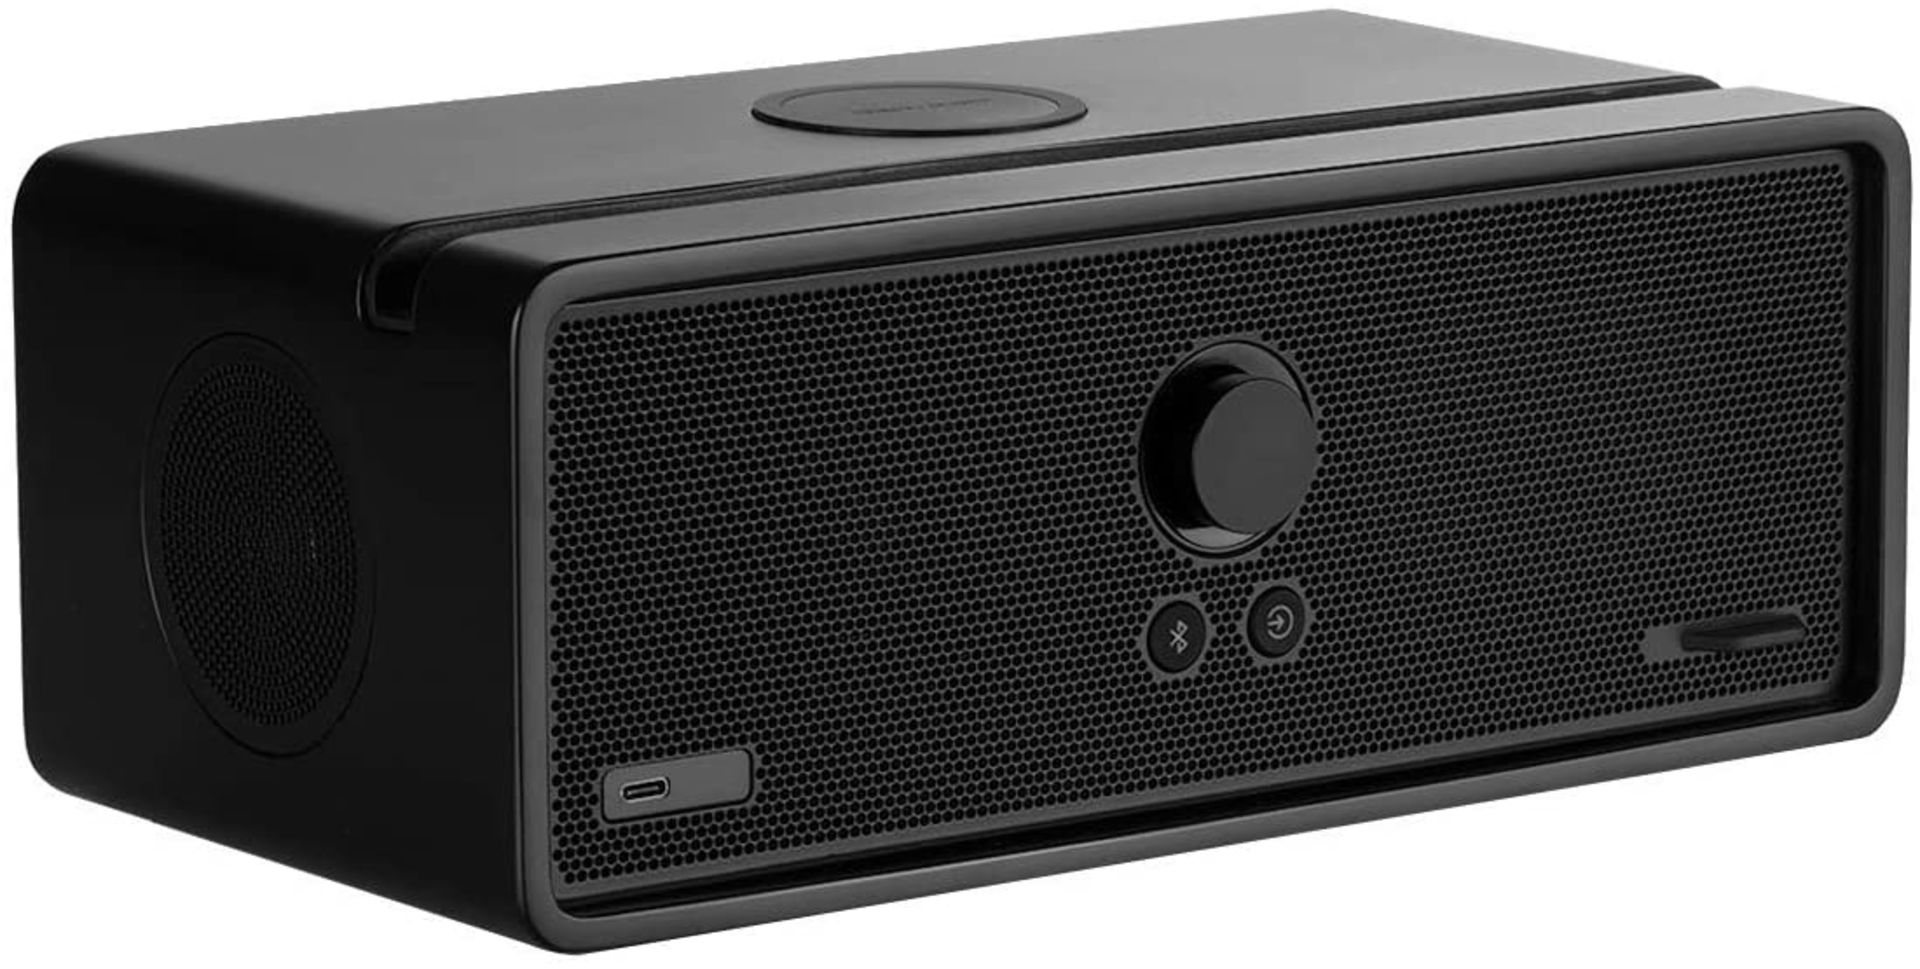 brand new orbitsound dock e30 bluetooth/wi-fi speaker system with airsound rrp£199 - Image 4 of 4